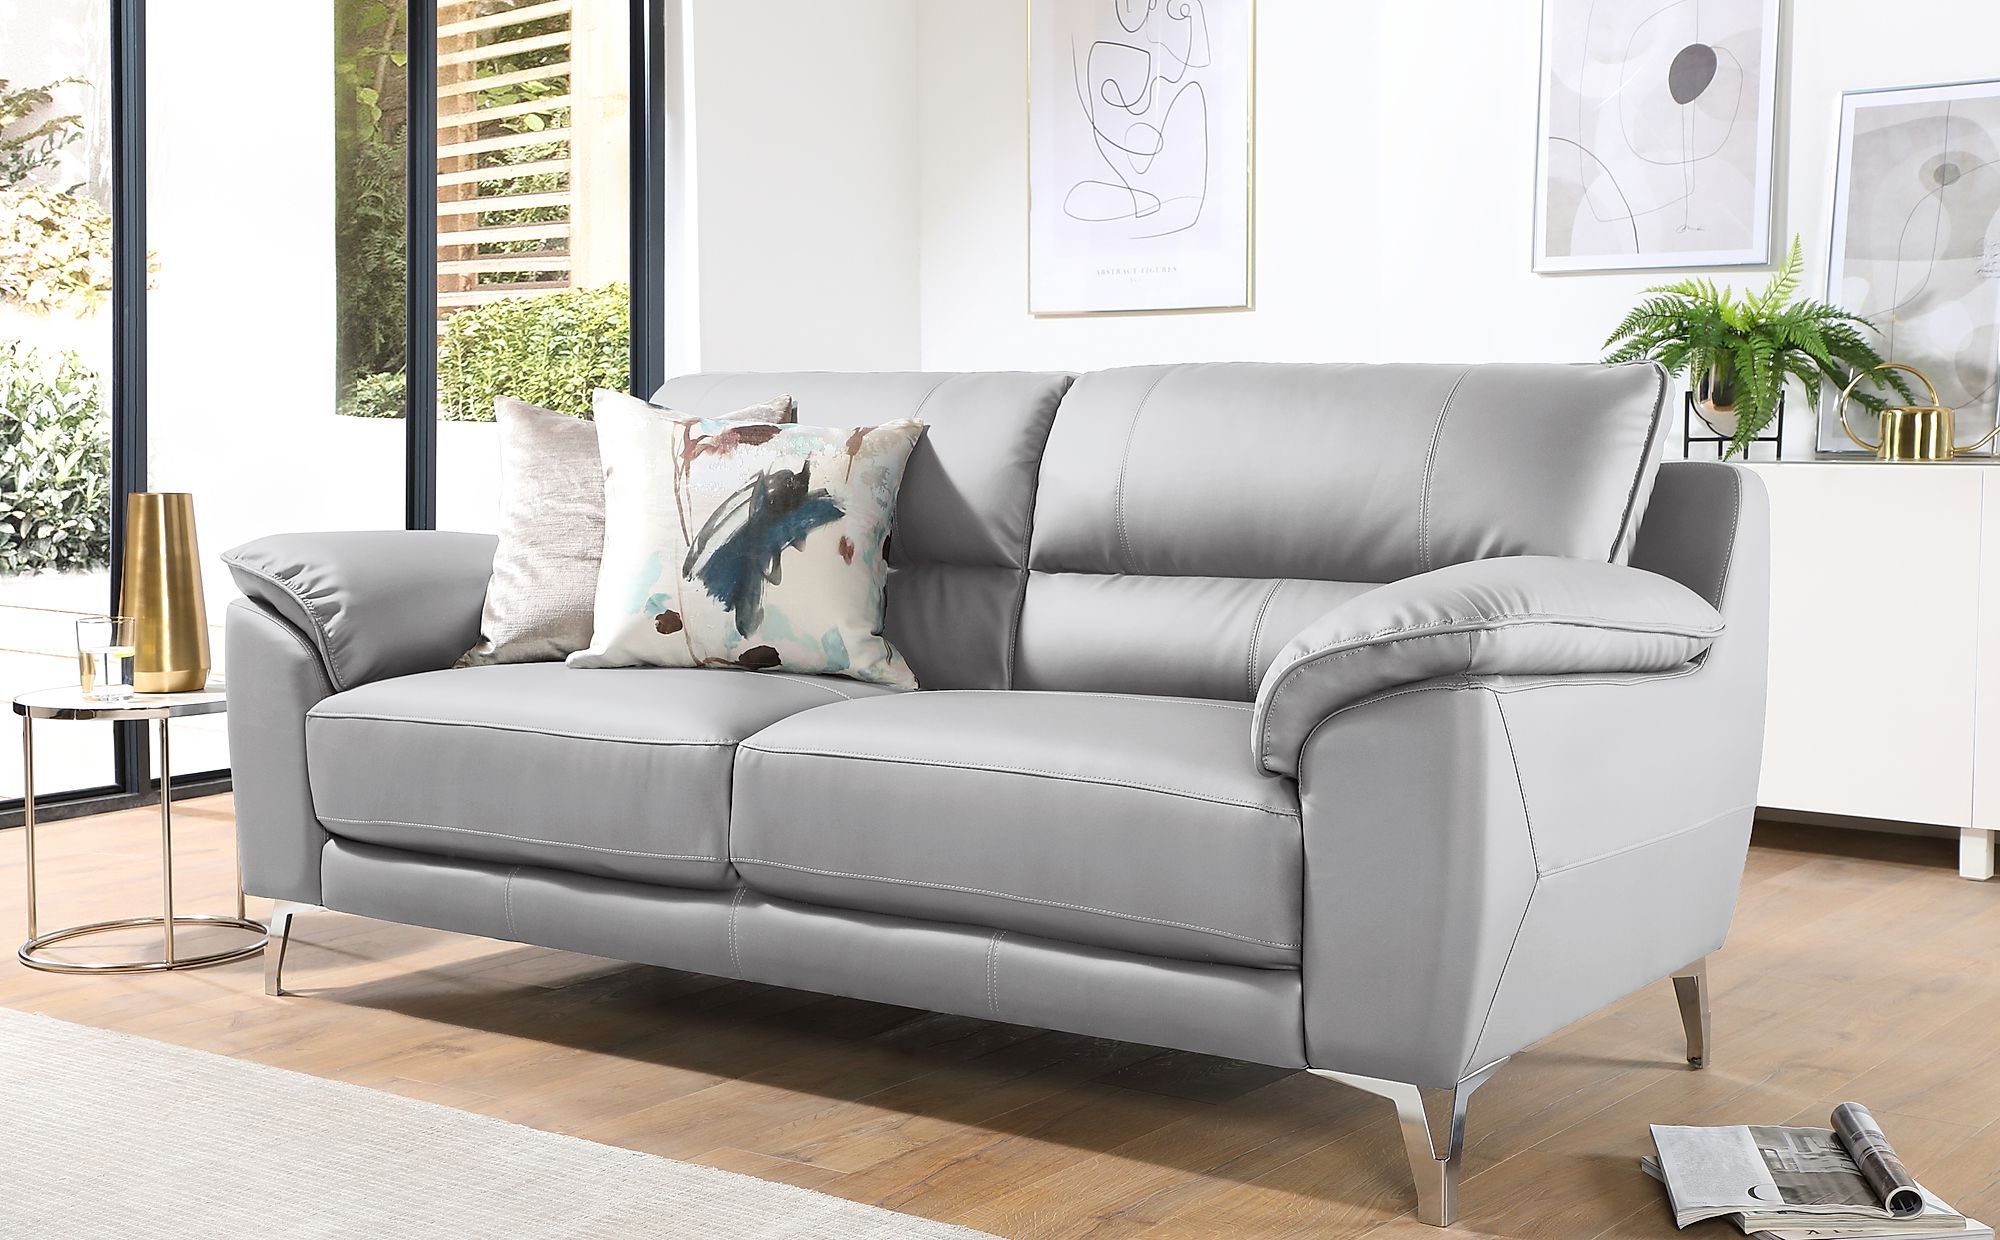 Madrid Light Grey Leather 3 Seater Sofa | Furniture Choice Intended For Sofas In Light Gray (Gallery 1 of 22)